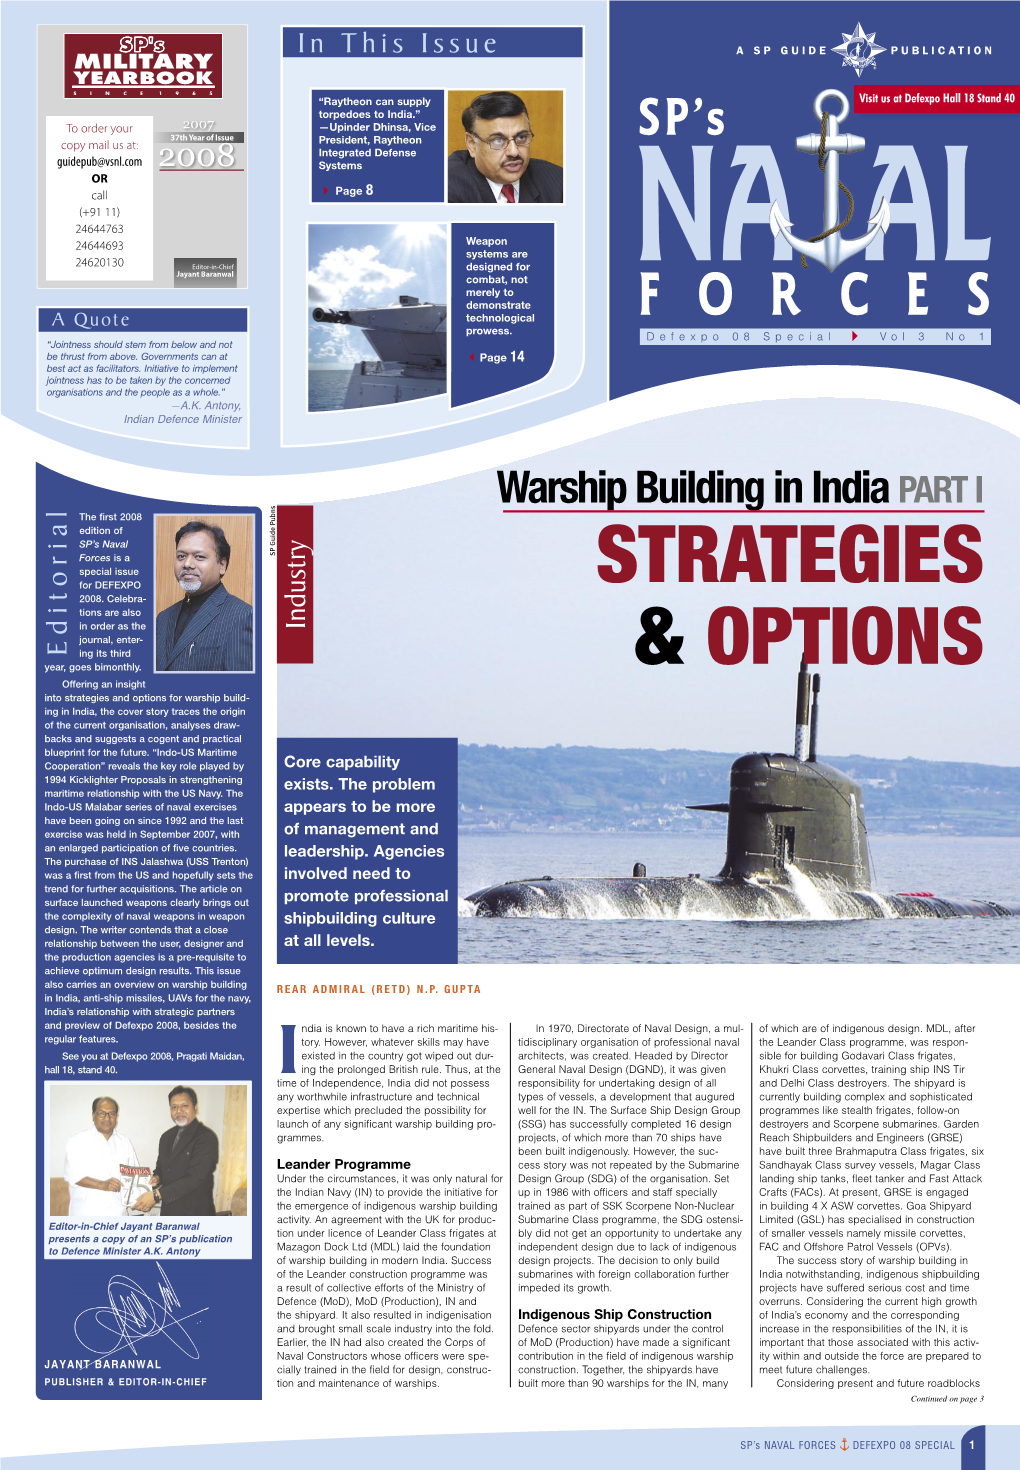 Maritime Cooperation” Reveals the Key Role Played by Core Capability 1994 Kicklighter Proposals in Strengthening Exists